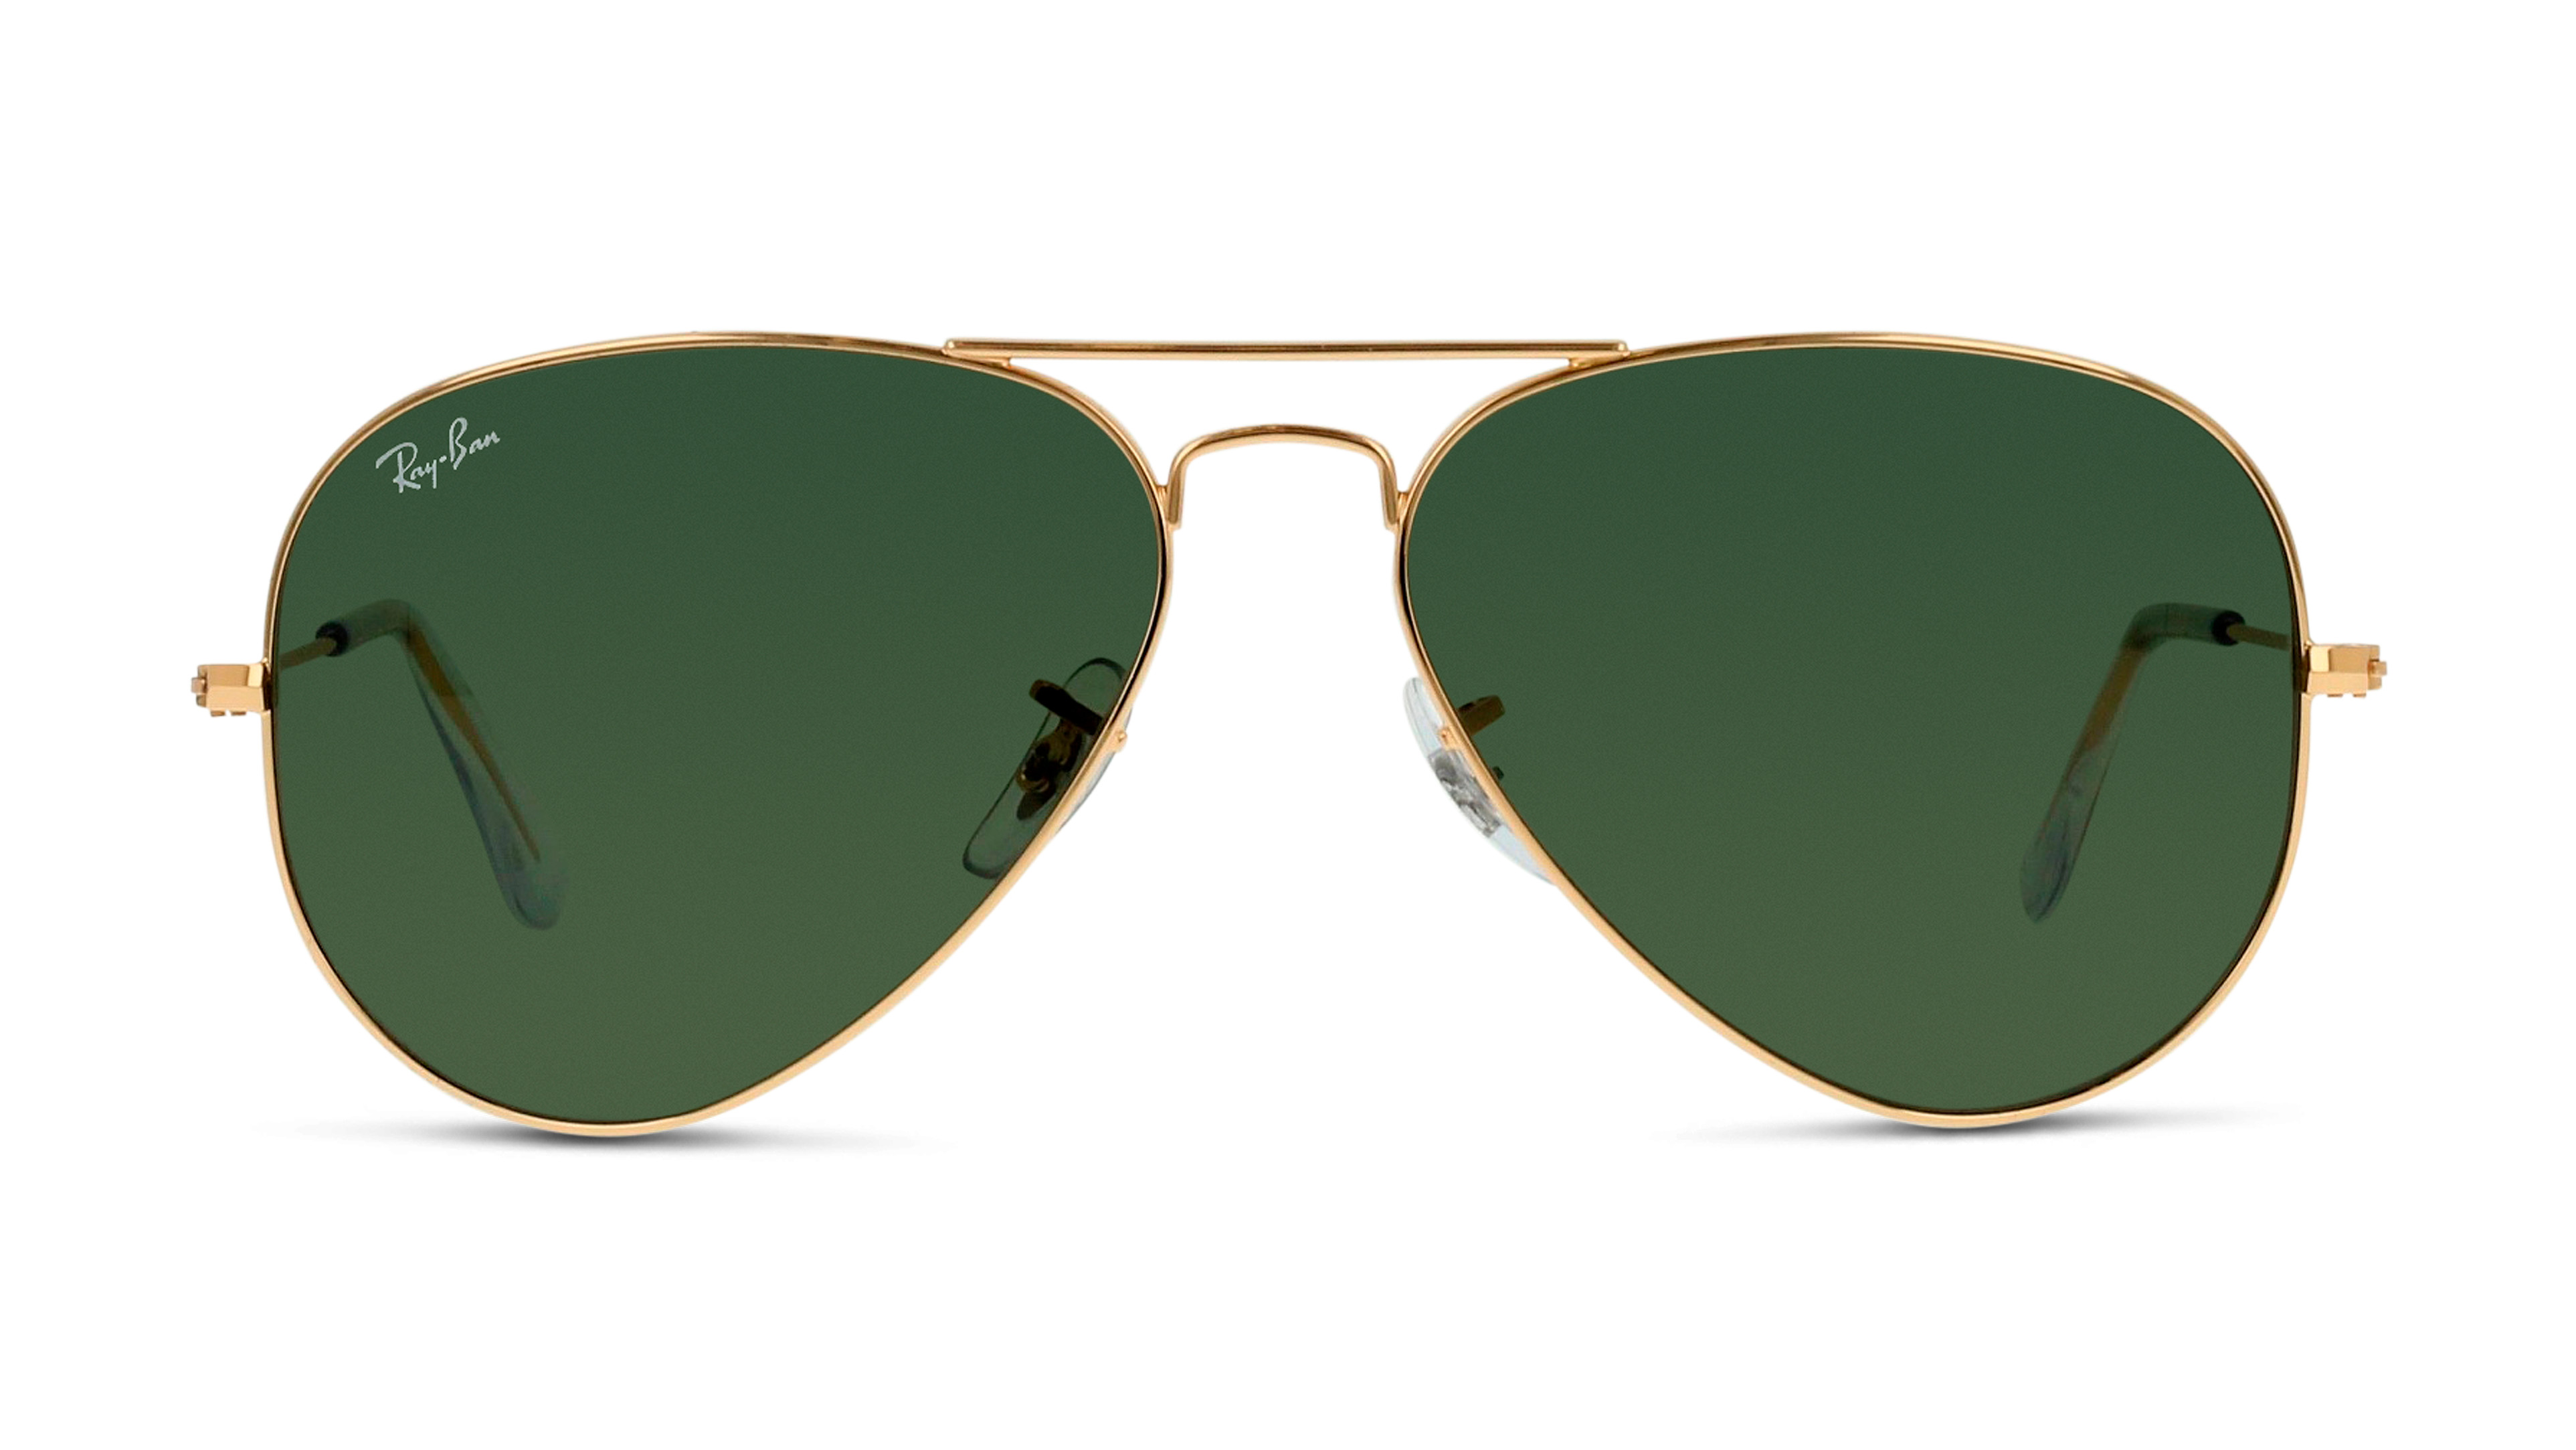 [products.image.front] Ray-Ban AVIATOR LARGE METAL 0RB3025 L0205 Sonnenbrille